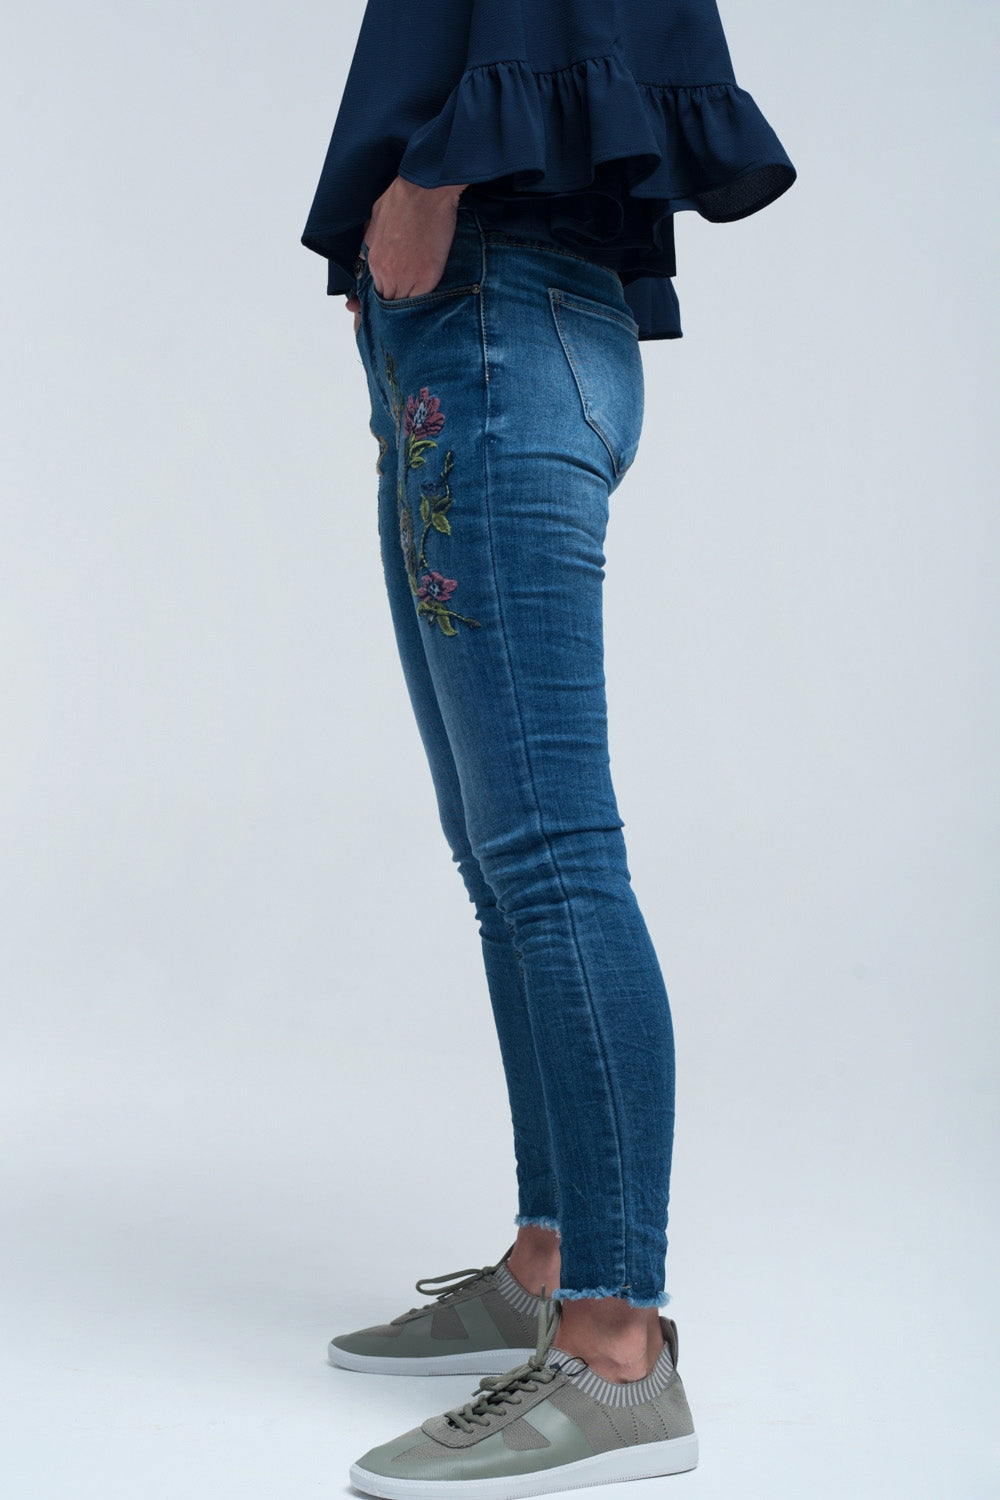 Blue Skinny Jean With Embroideries - LOLA LUXE